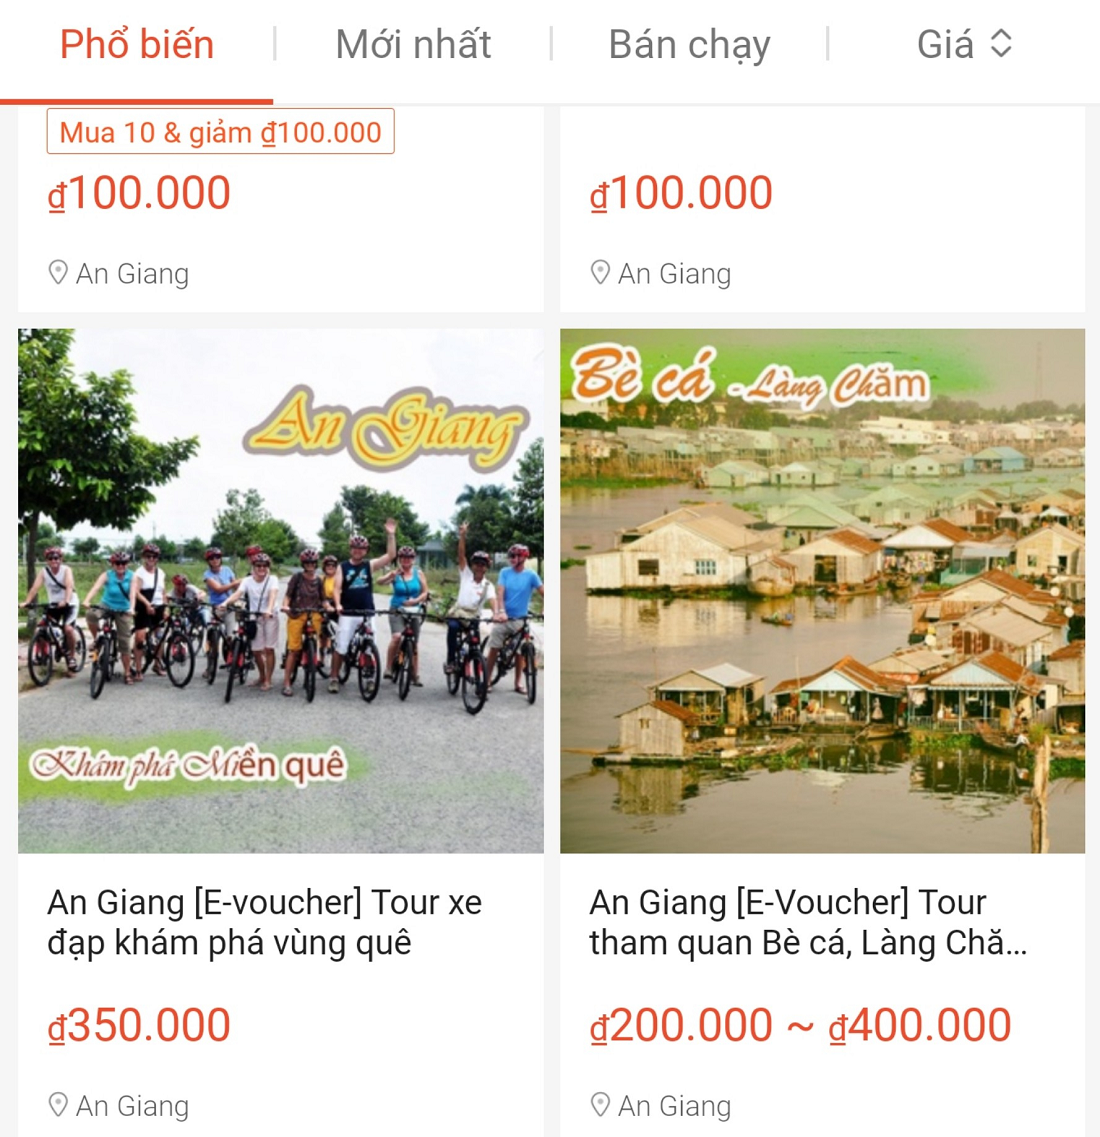 An Giang brings tourism businesses to join the Shopee e-travel exchange